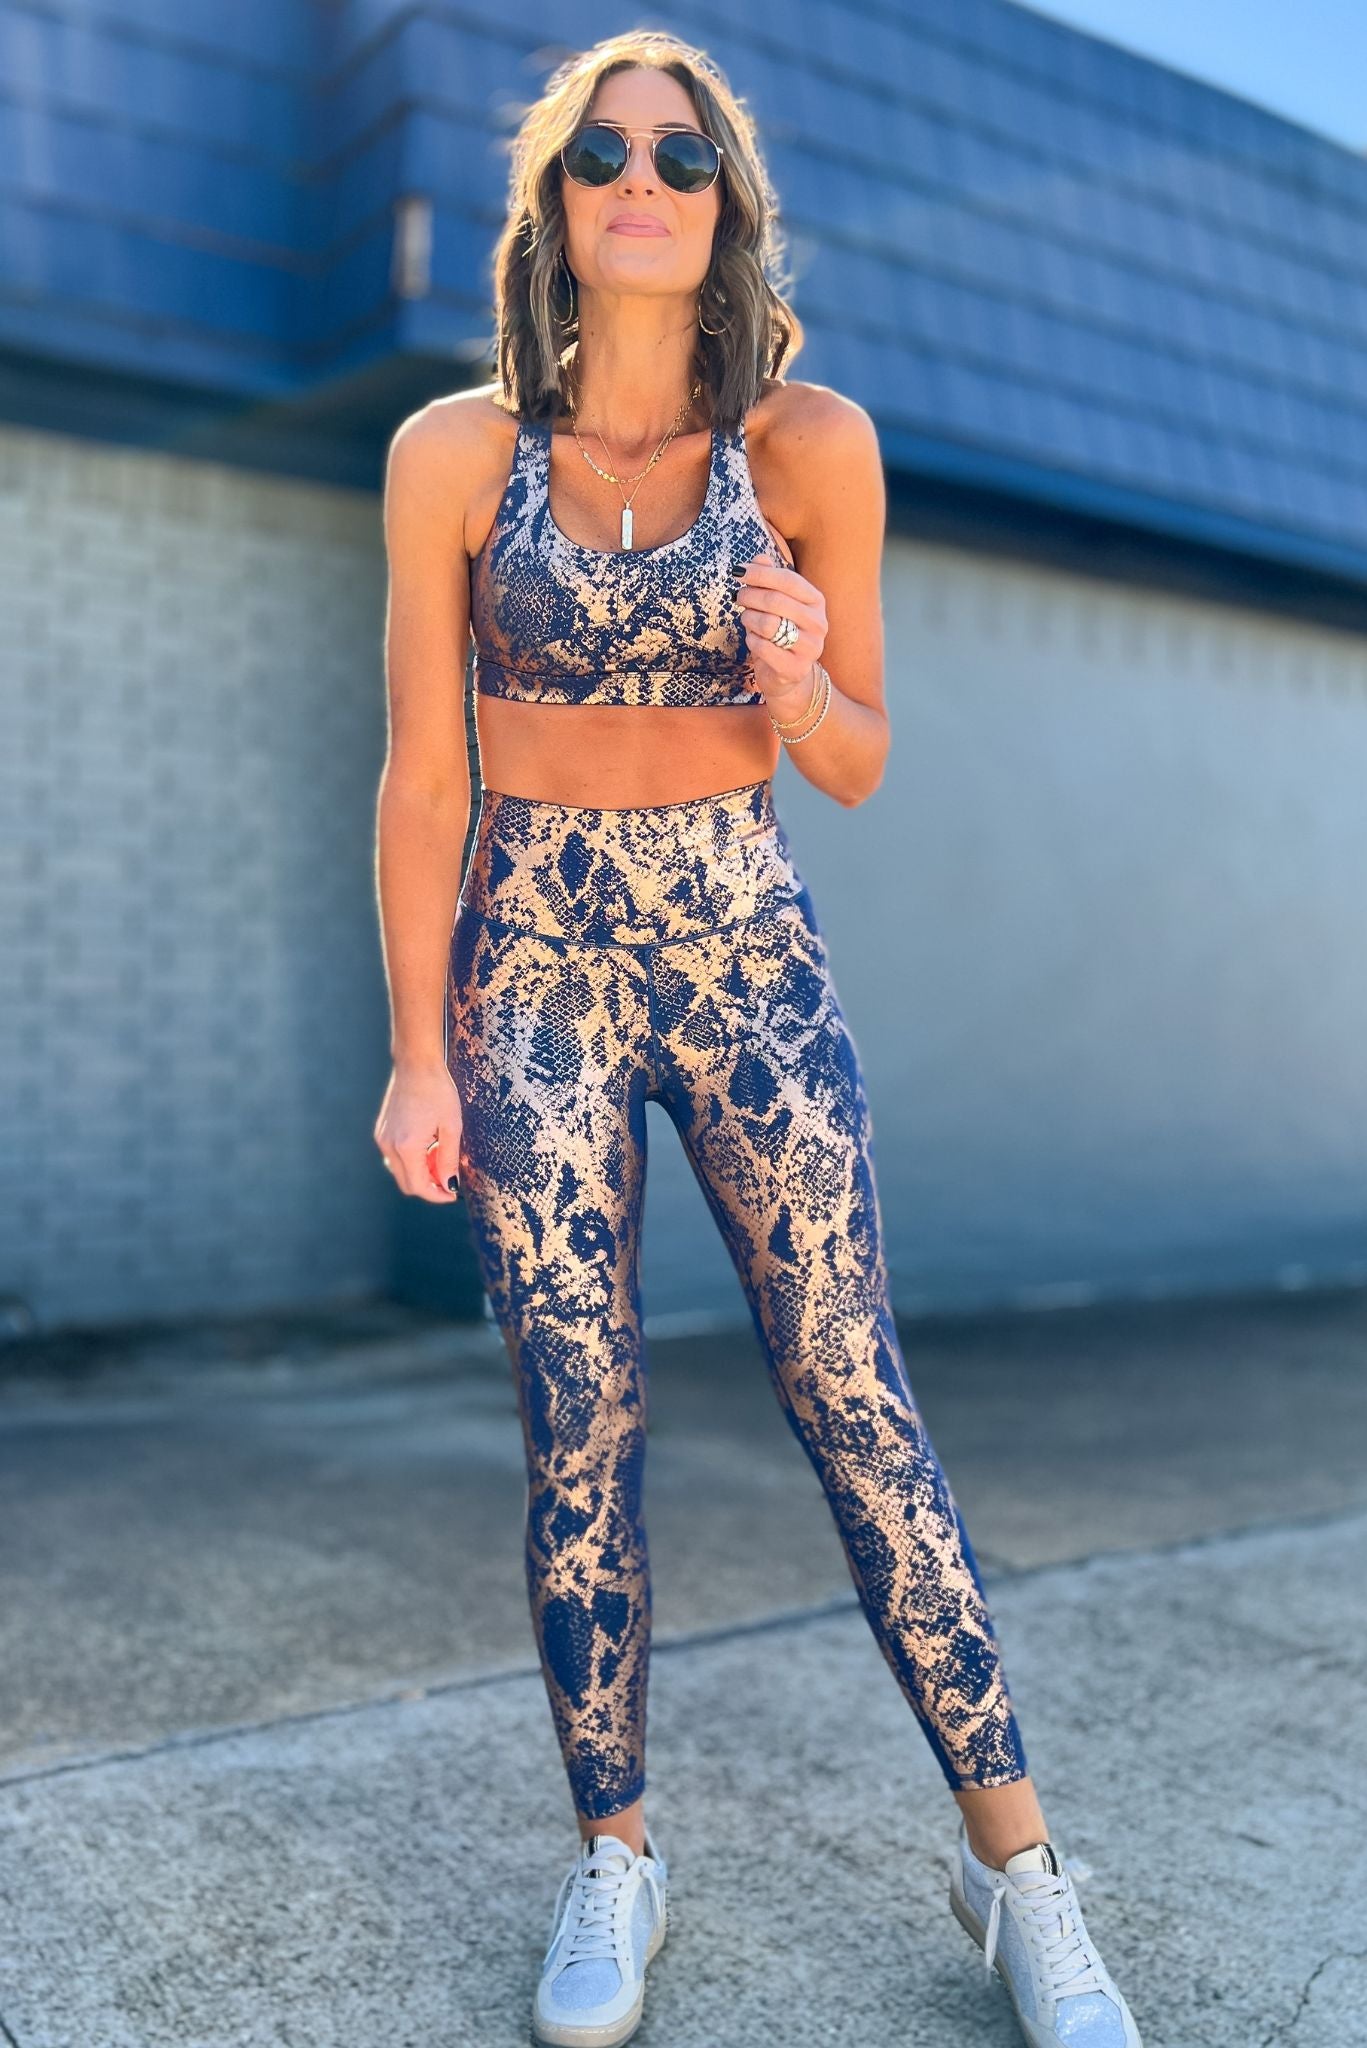 Copper Metallic Scale Print On Navy Active LeggingsSSYS The Label, athleisure, everyday wear, mom style, layered look, must have, shop style your senses by mallory fitzsimmons